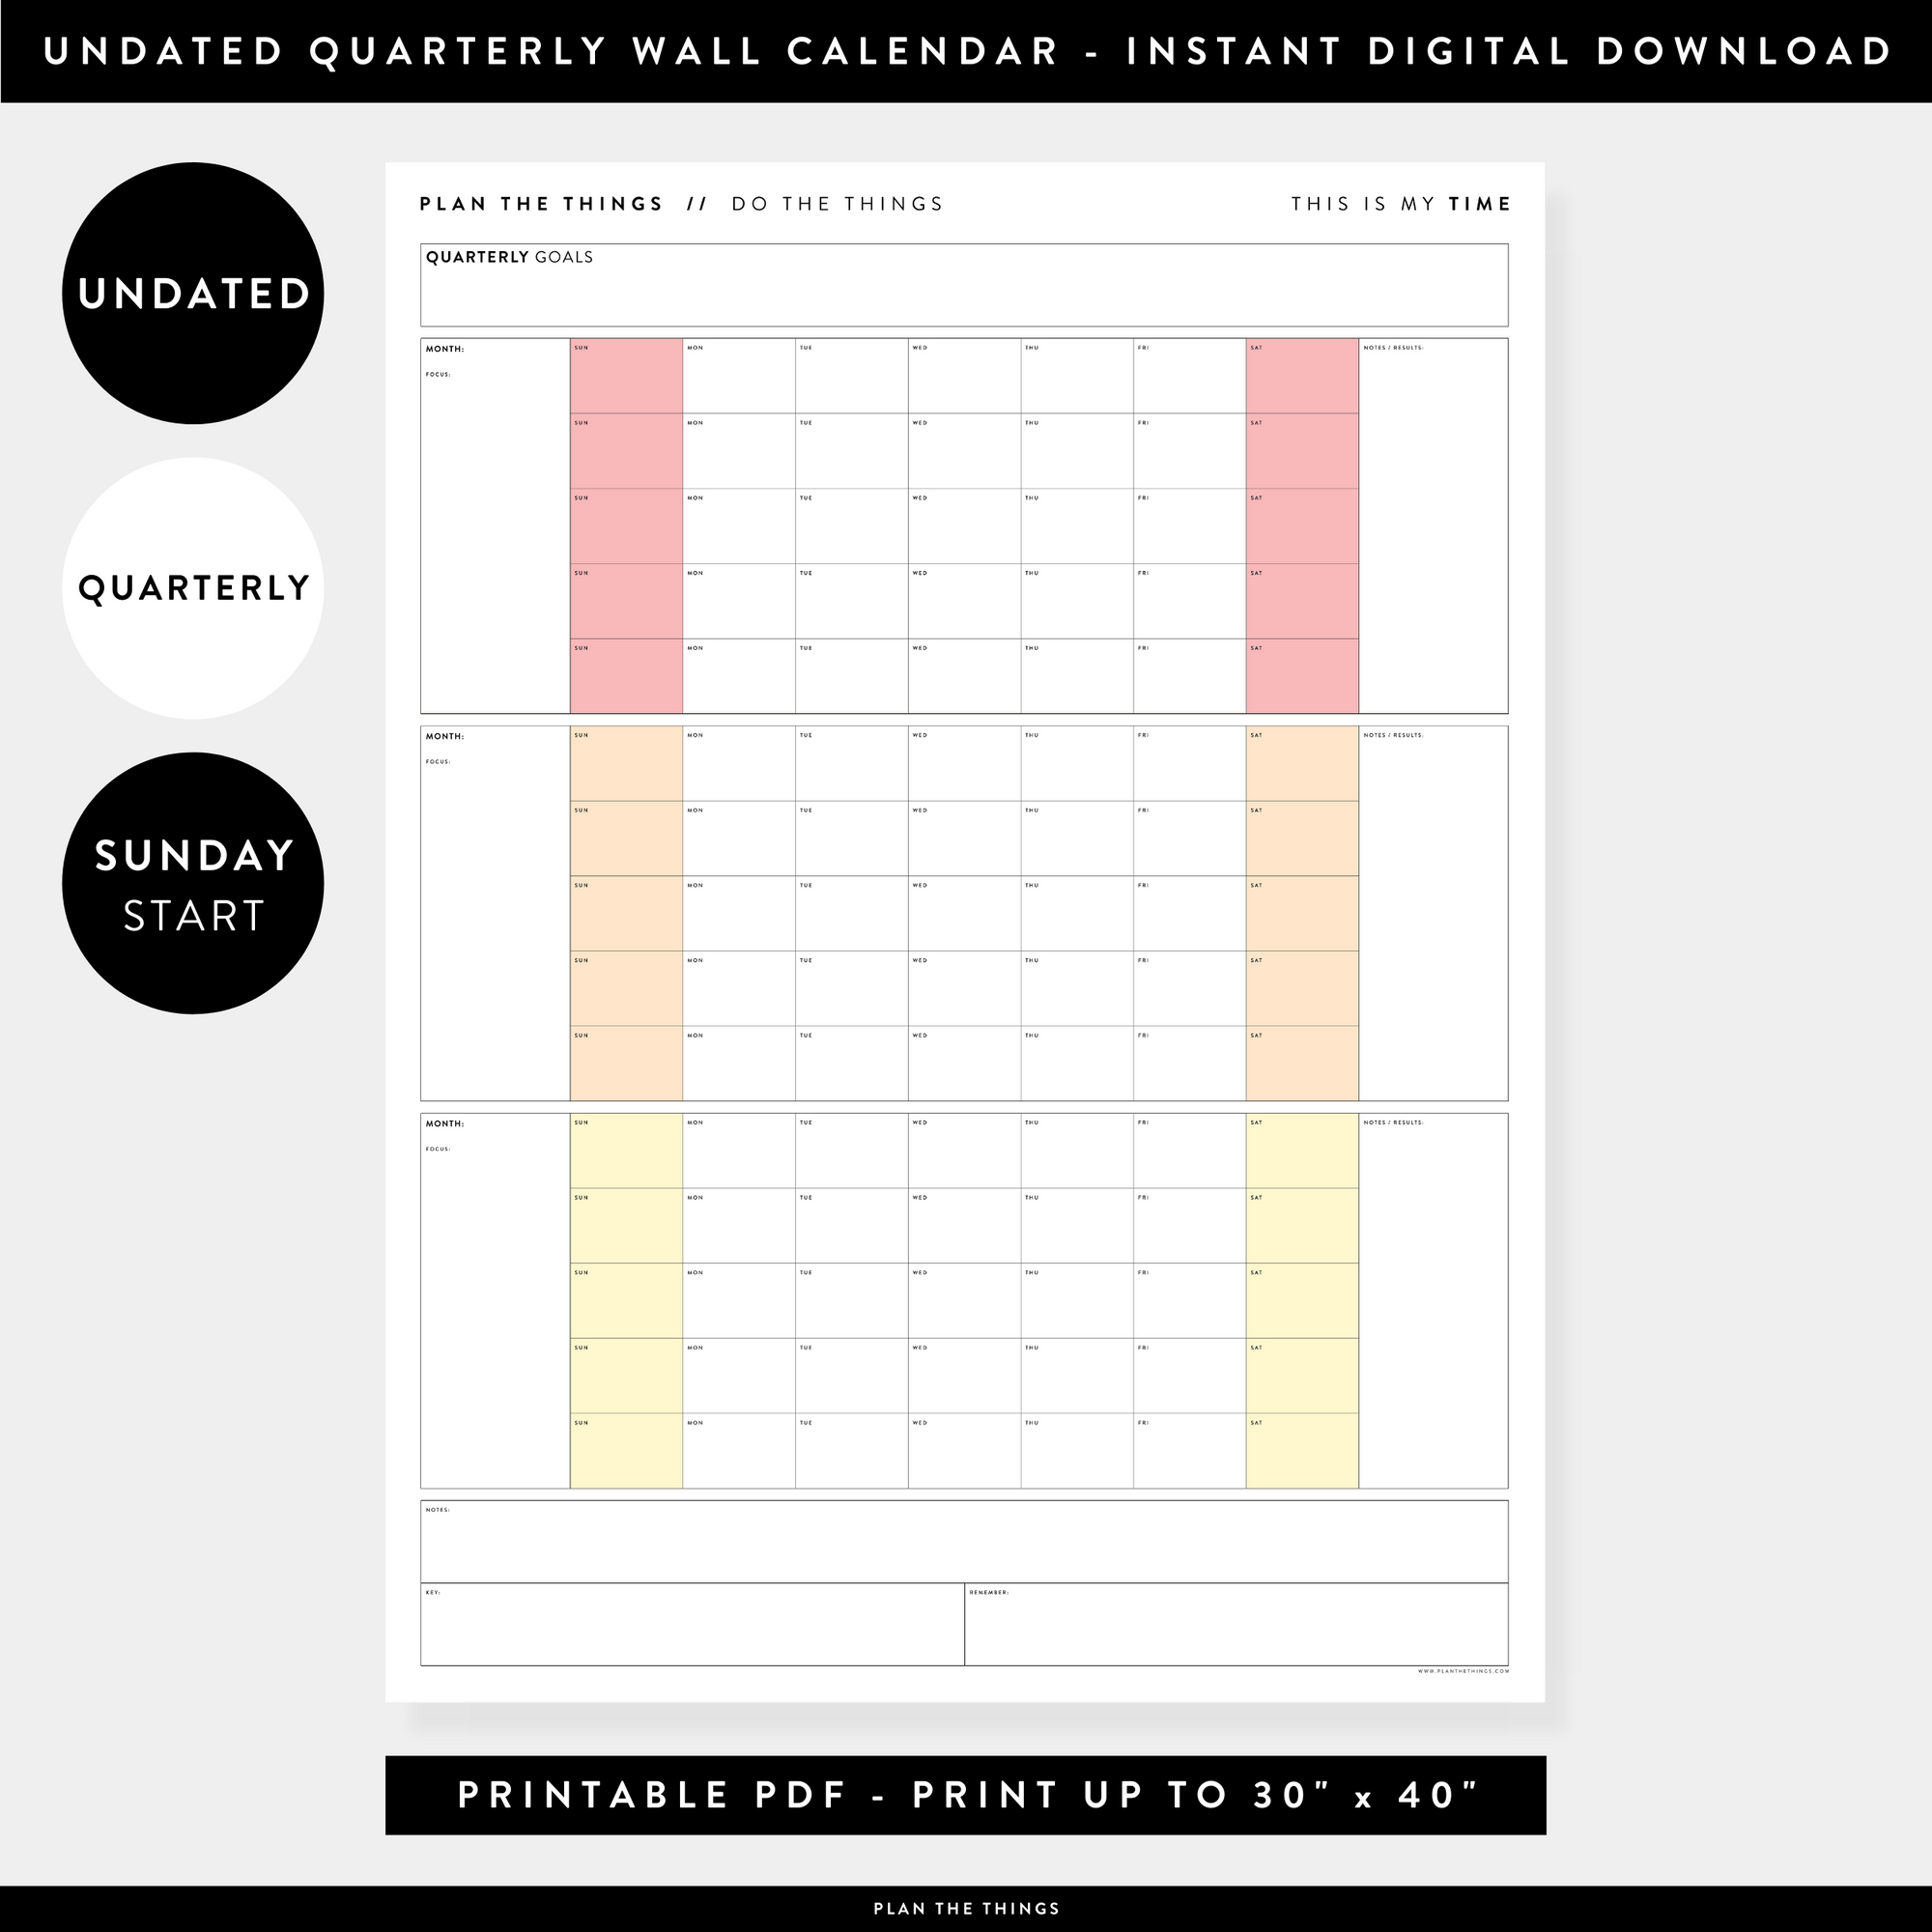 PRINTABLE UNDATED QUARTERLY WALL CALENDAR - SUNDAY START - RAINBOW (1) WEEKENDS - INSTANT DOWNLOAD